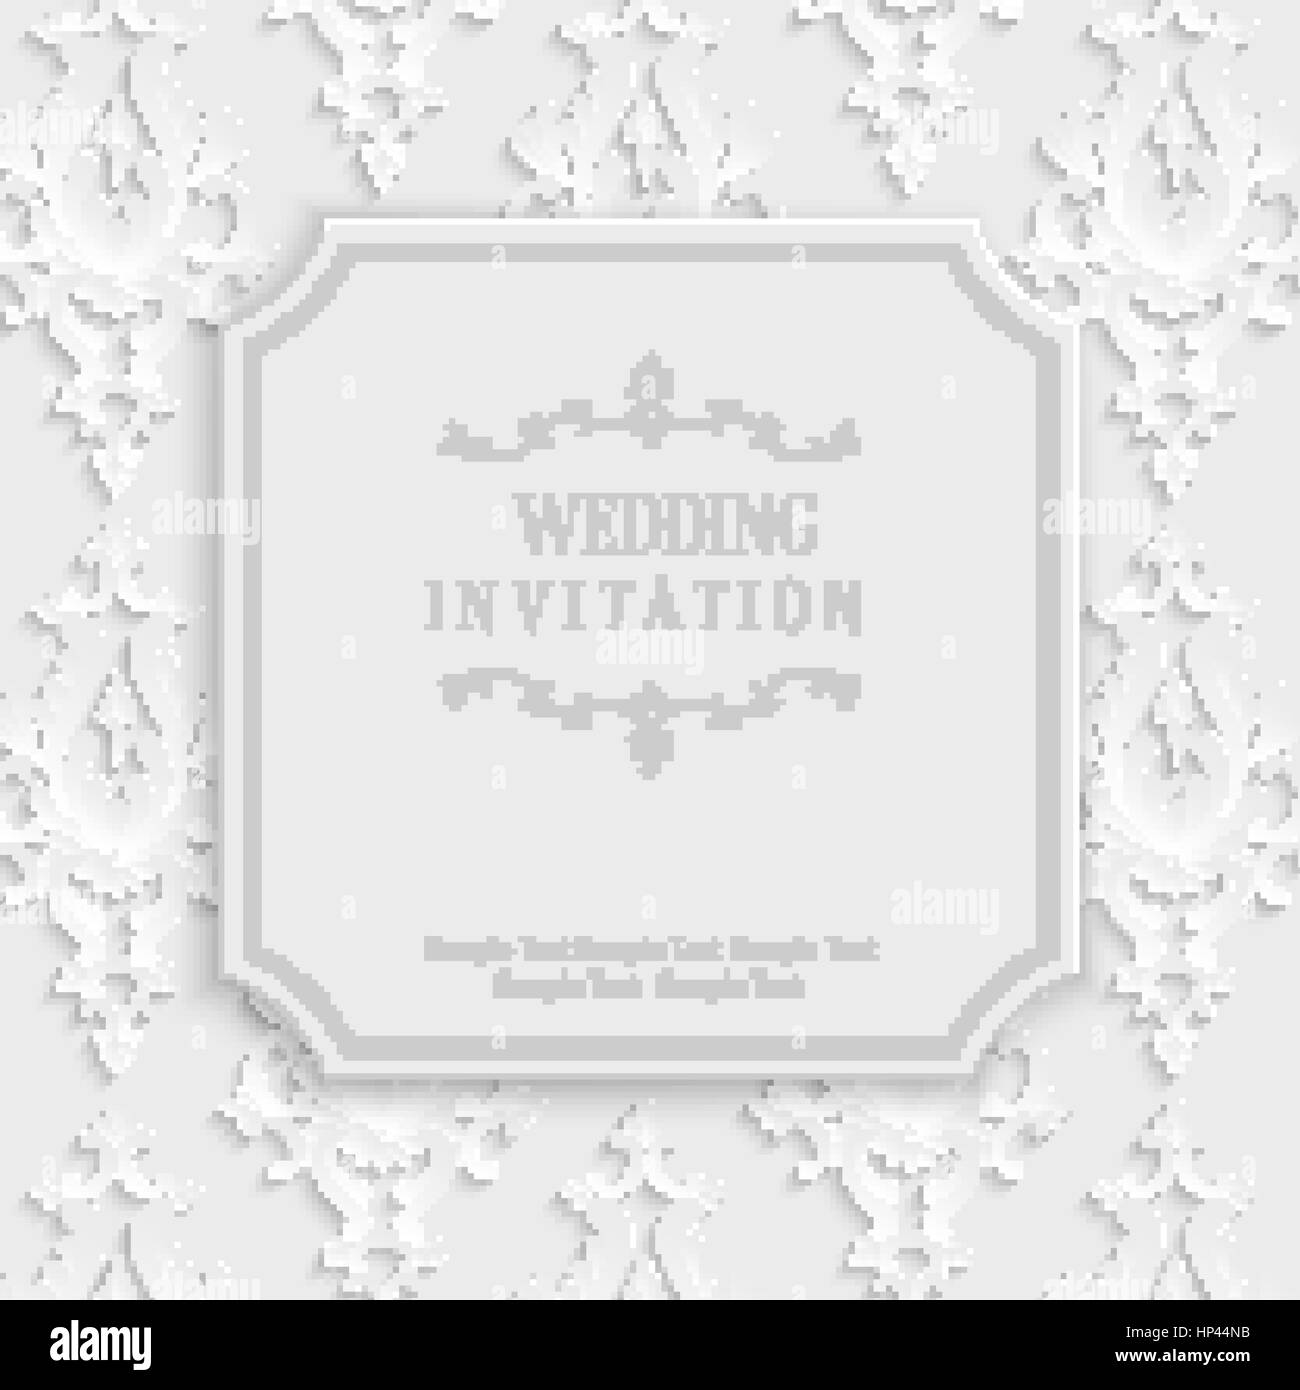 Vector 3d Vintage Wedding or Invitation or Greeting Card with Damask Floral Pattern Stock Vector